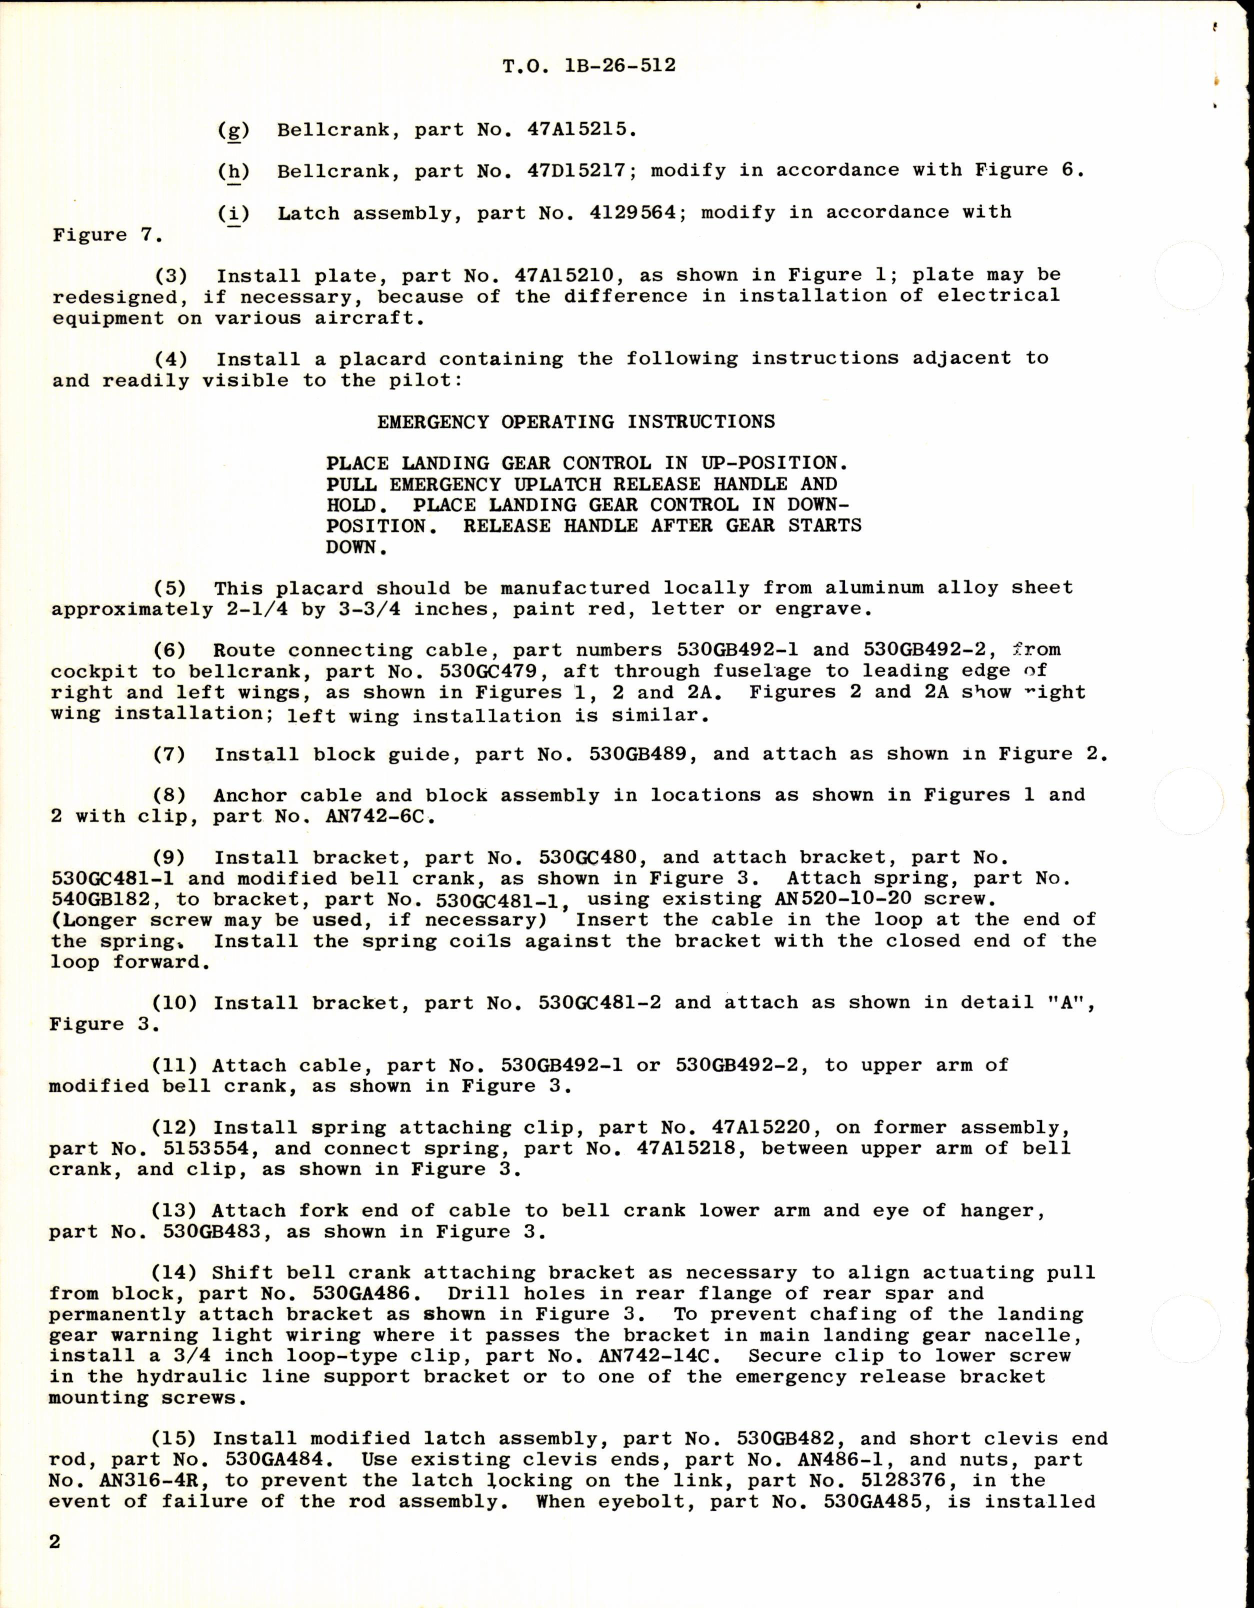 Sample page 2 from AirCorps Library document: Emergency Main Landing Gear Uplatch Release for B-26